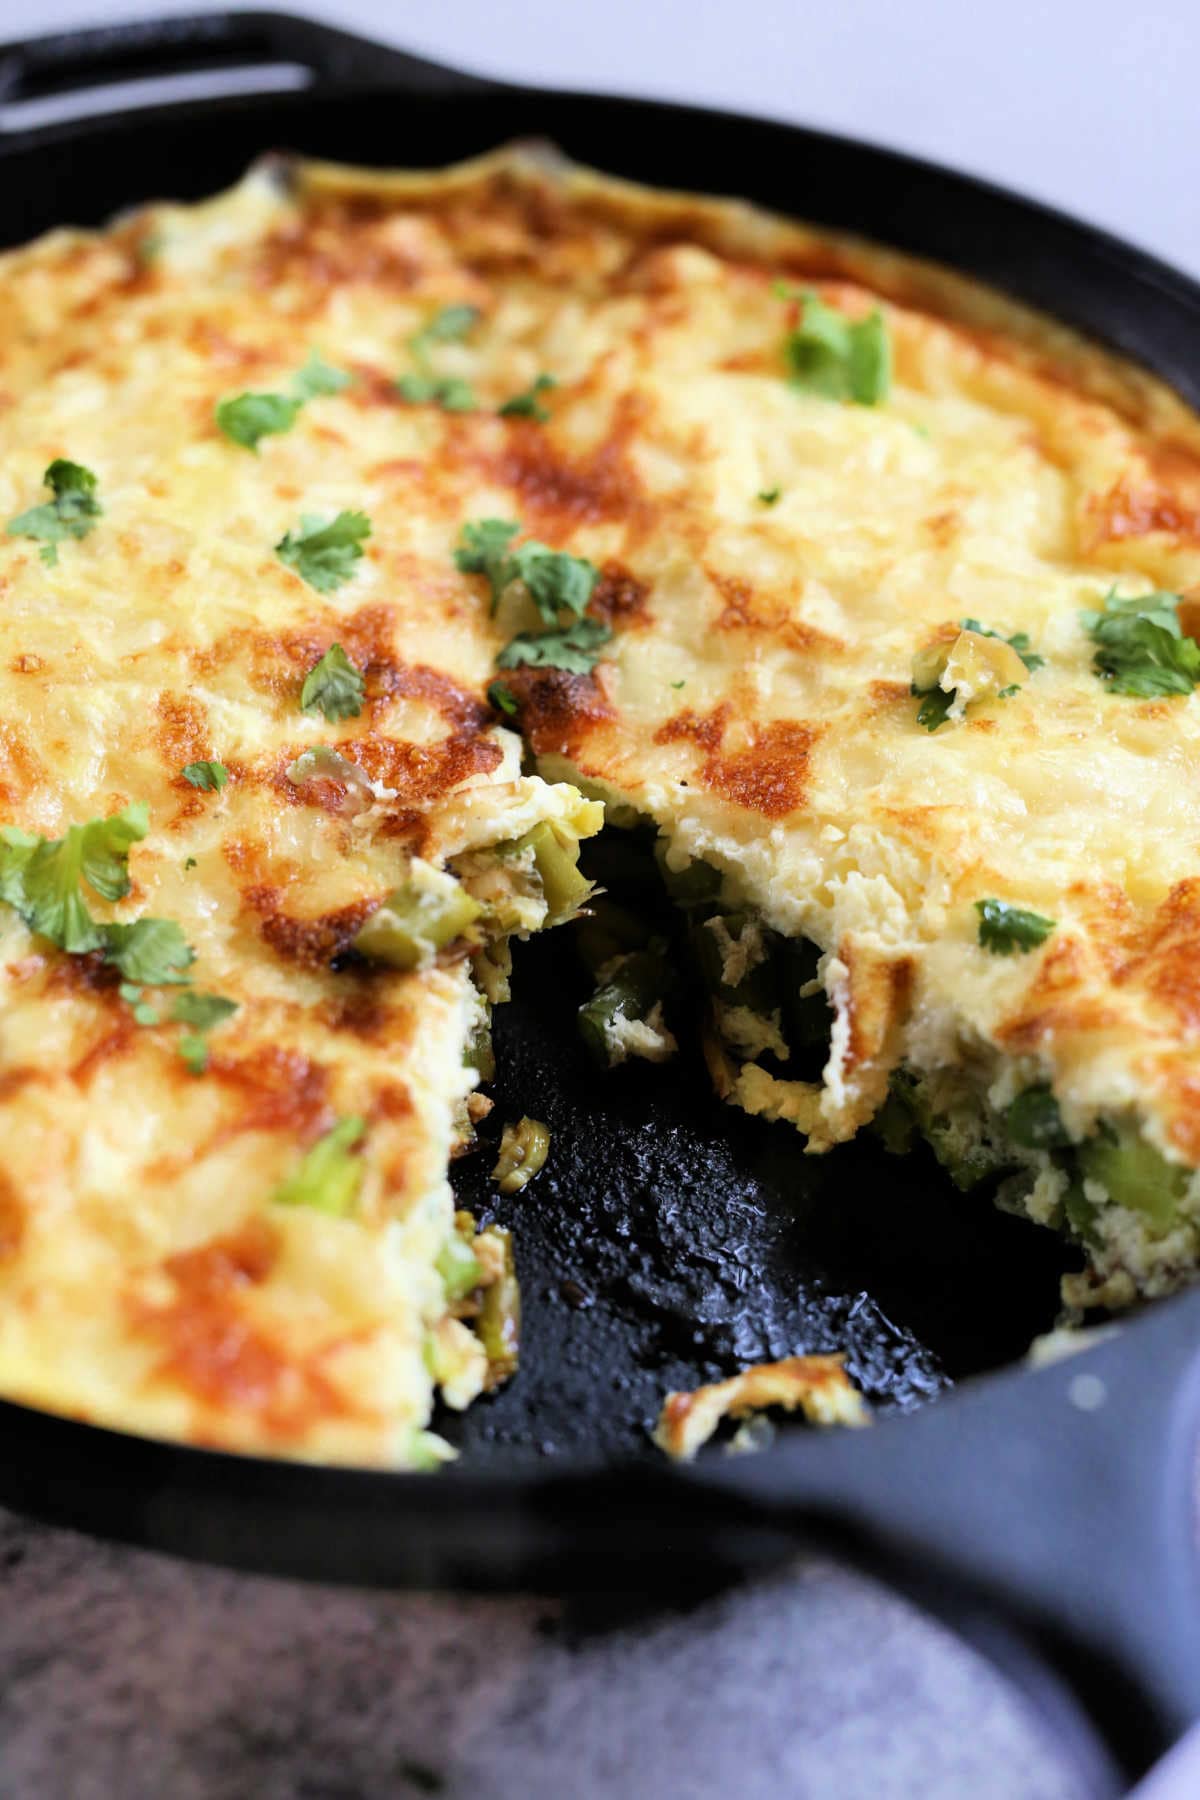 Healthy Asparagus And Leek Frittata Recipe In A Skillet